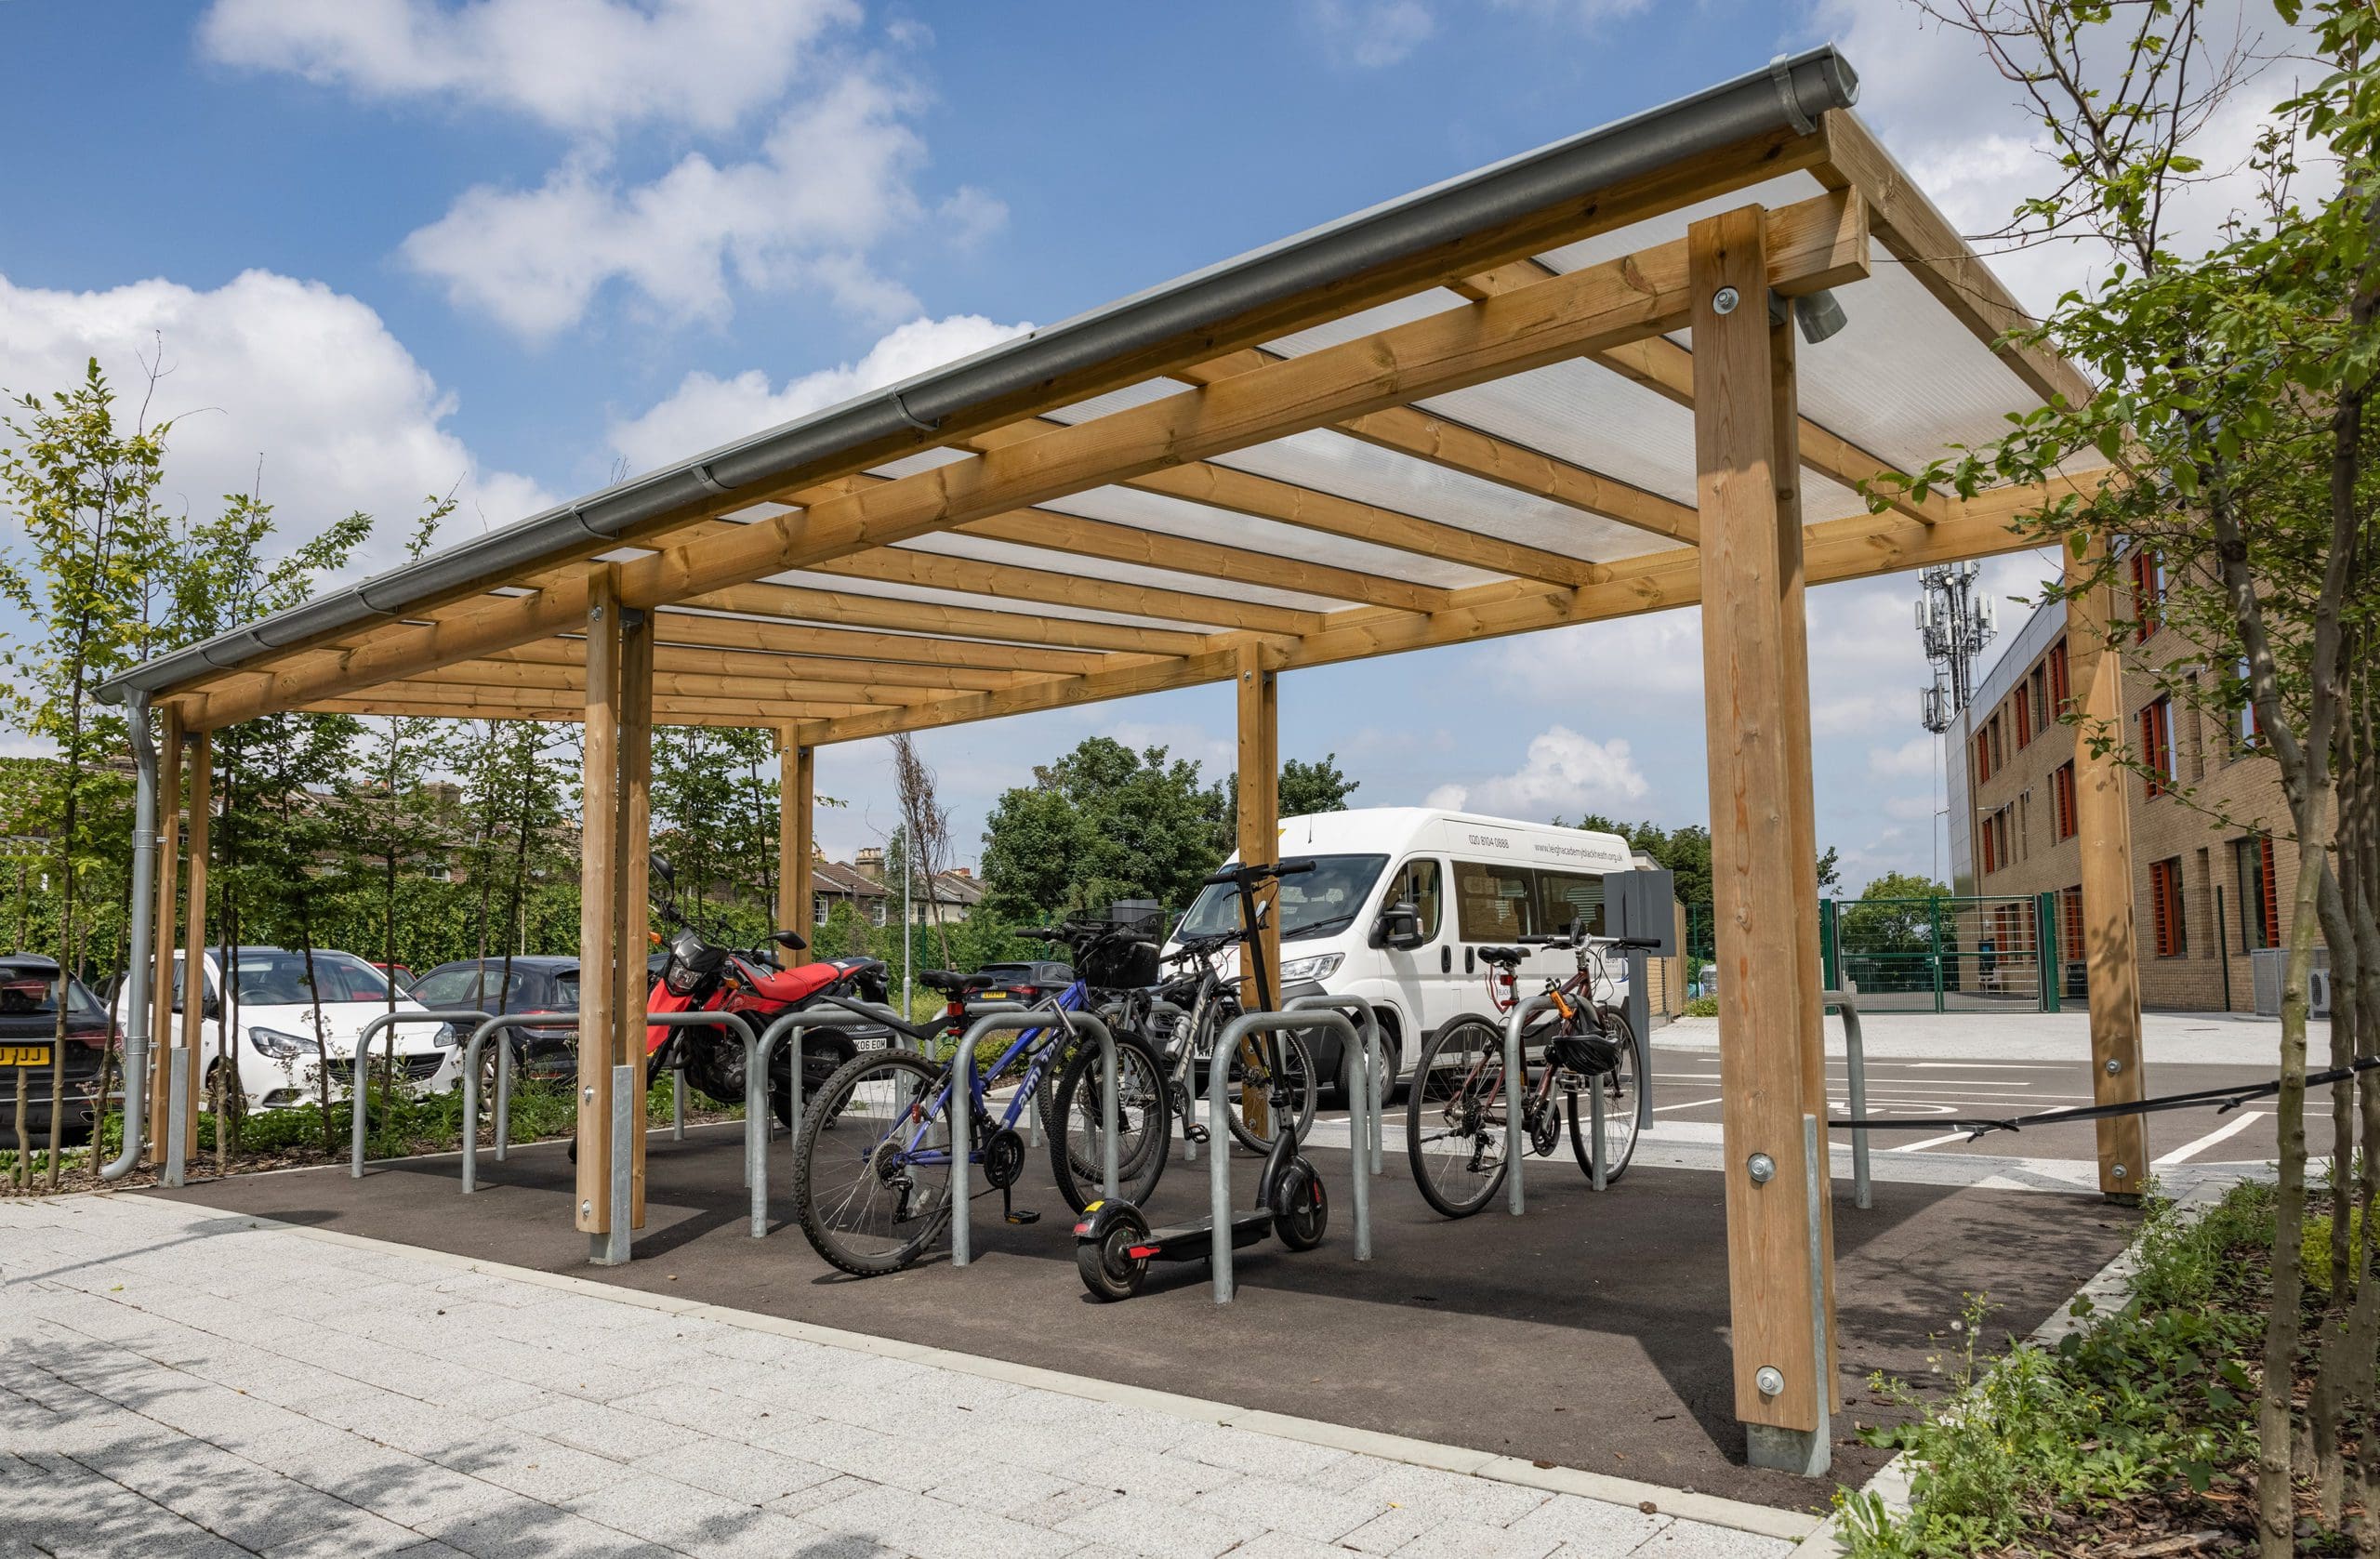 exterior-pergola-bike-storage-metal-curved-rings-in-the-ground